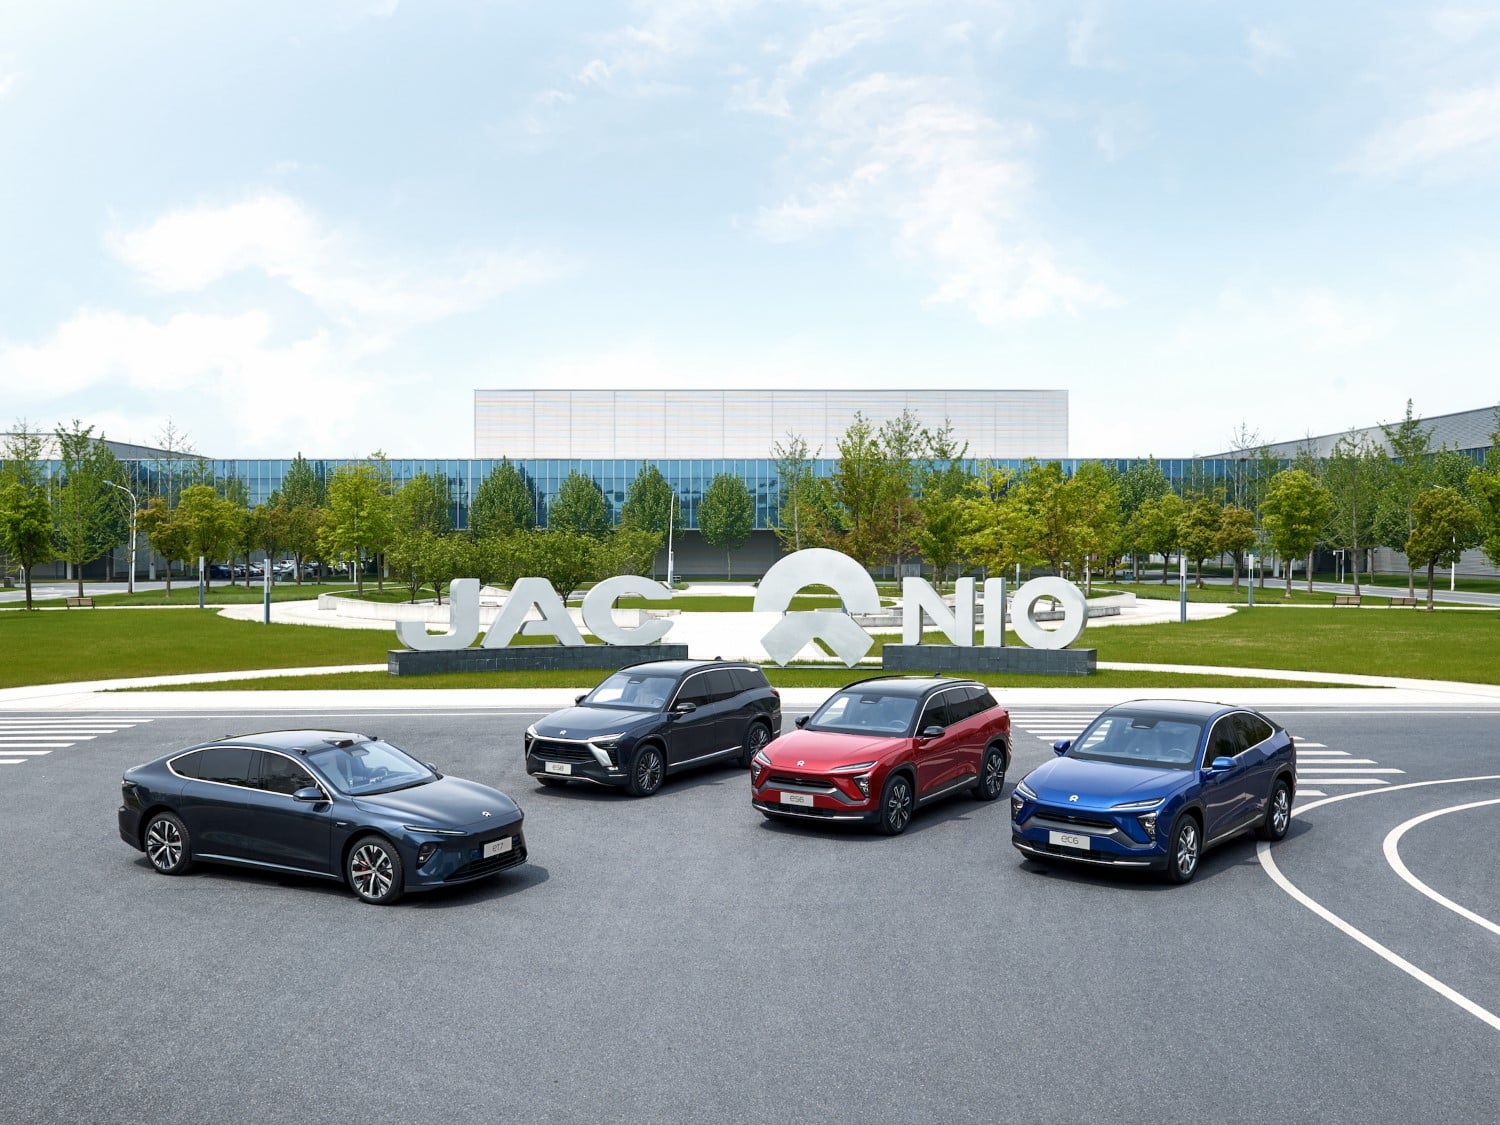 BREAKING: NIO's 200,000th production vehicle rolls off line-CnEVPost